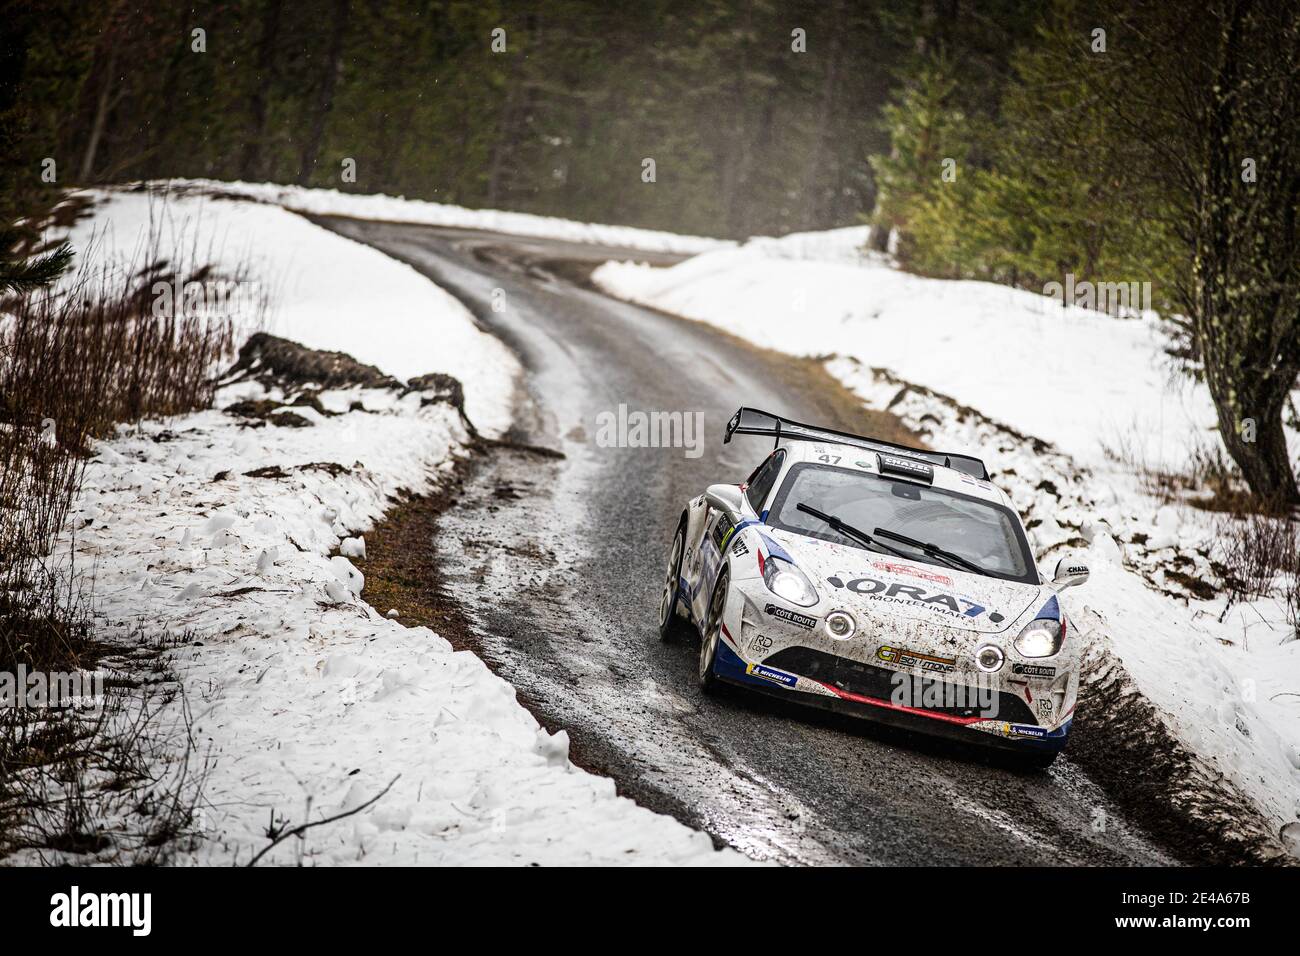 47 Raphael ASTIER (FRA), Frederic VAUCLARE (FRA), ALPINE A110, RGT RGT cars, action during the 2021 WRC World Rally Car Championship, Monte Carlo rally on January 20 to 24, 2021 at Monaco - Photo Bastien Roux / DPPI / LM Stock Photo